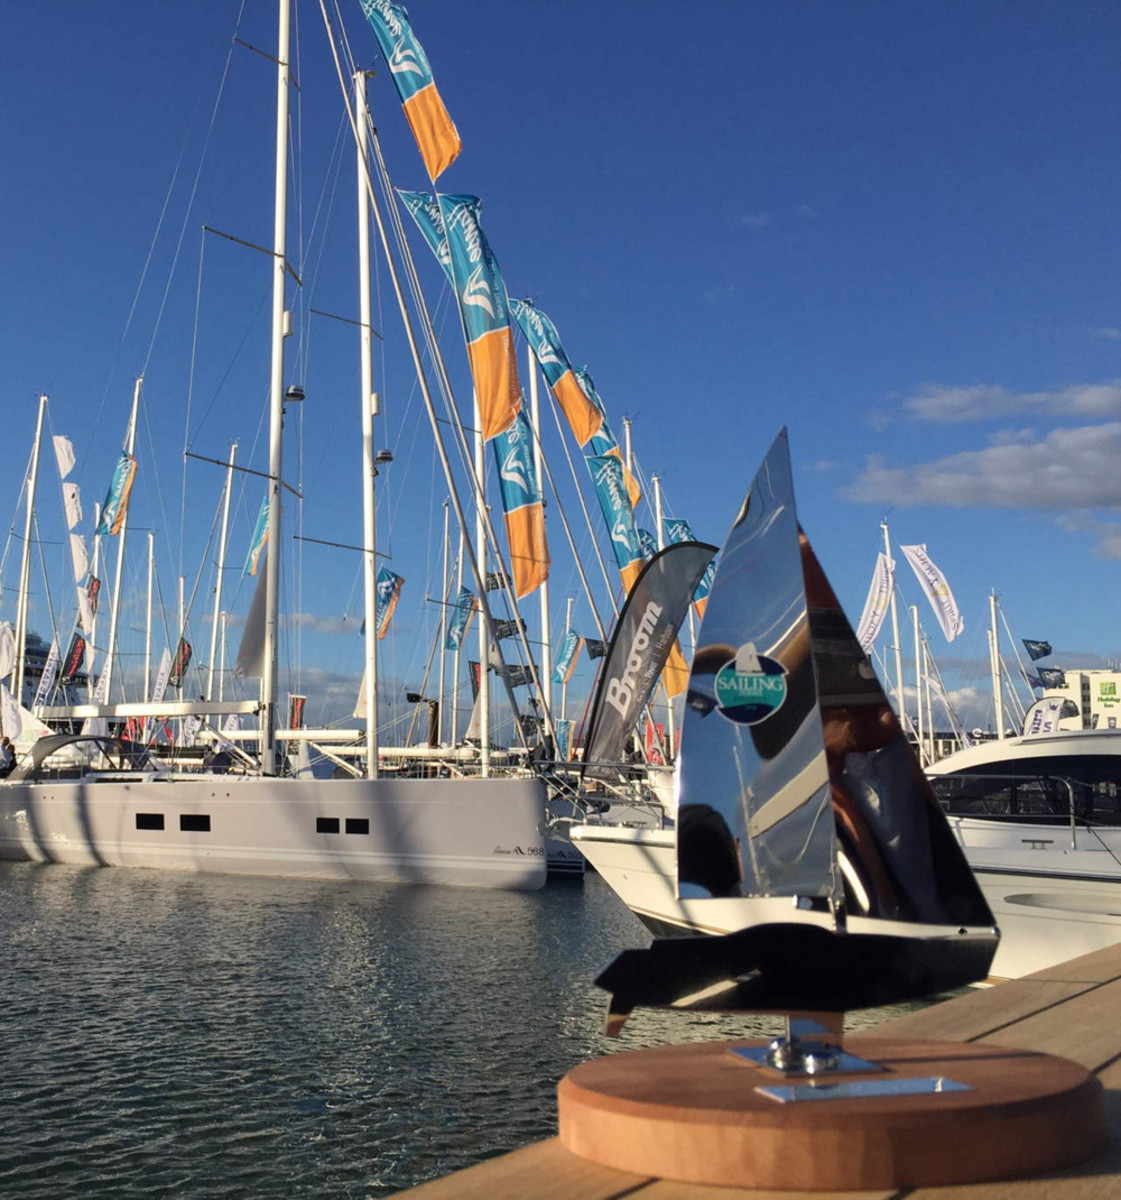 Sailing Today honored Hanse Yachts AG with its Boat Builder of the Year Award.